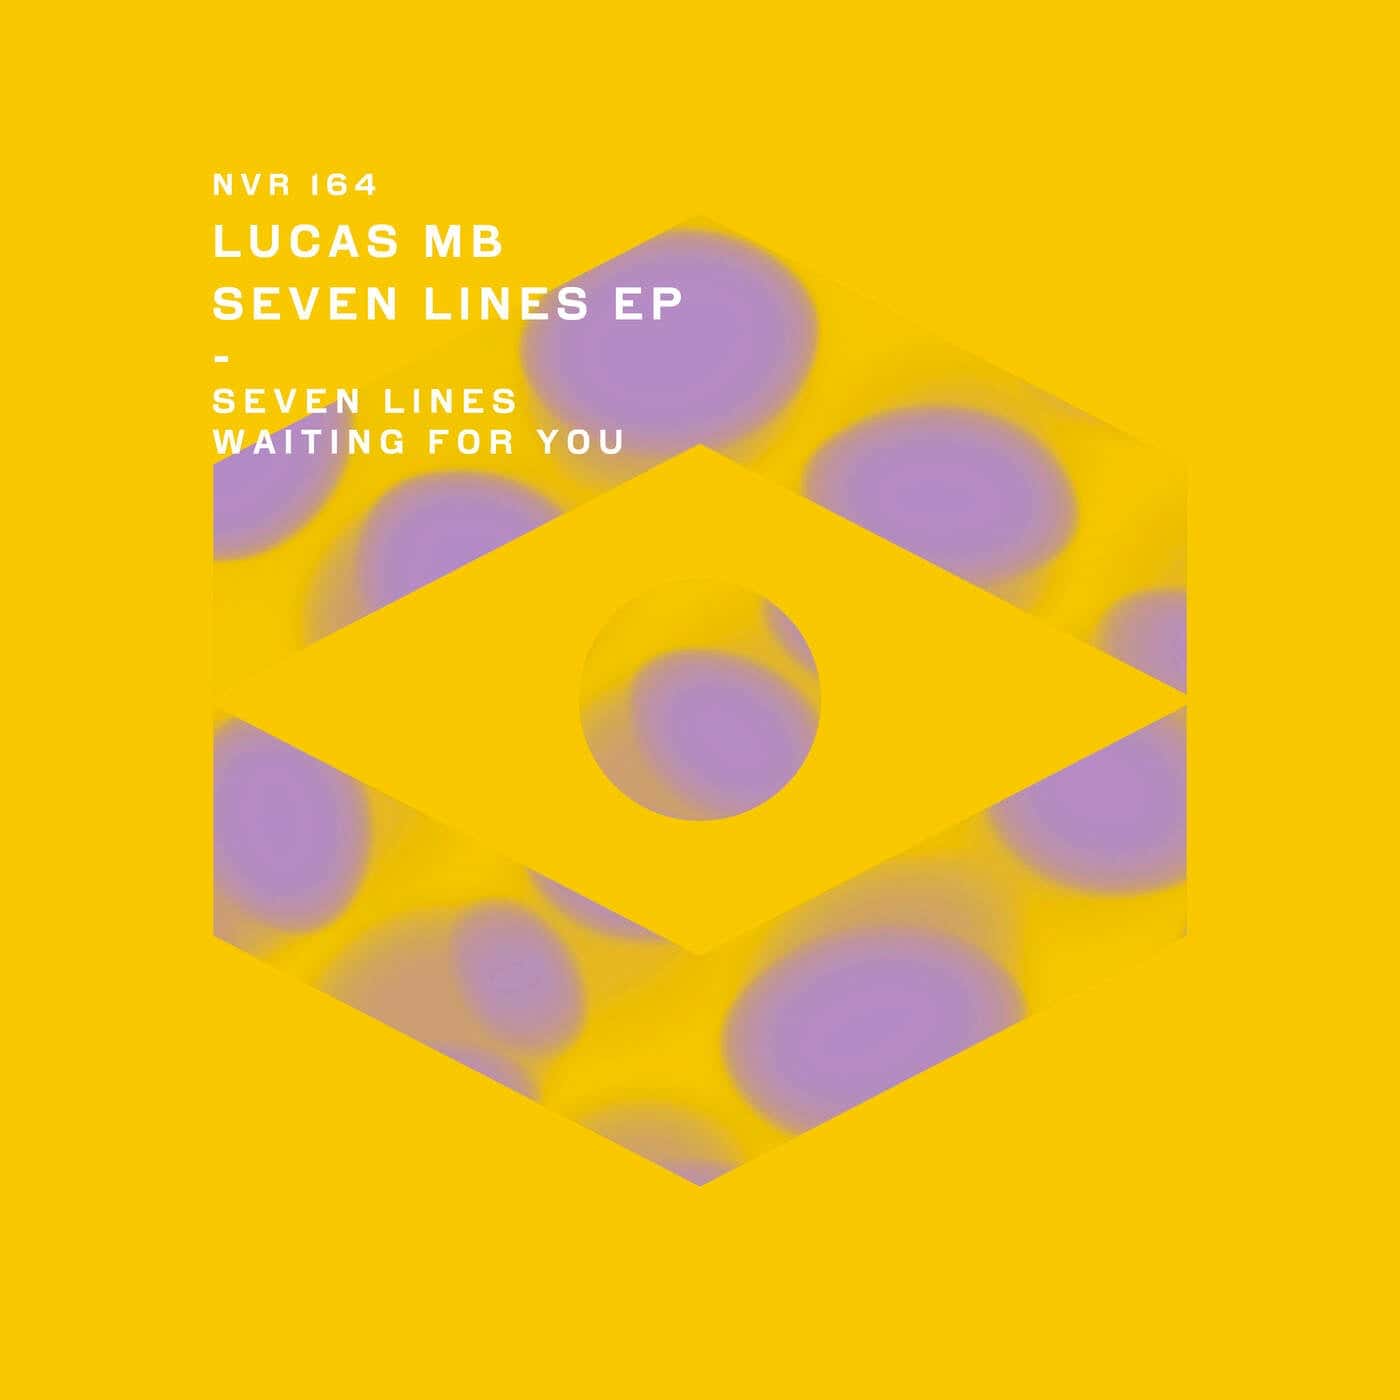 image cover: LUCASMB - Seven Lines EP / NVR164